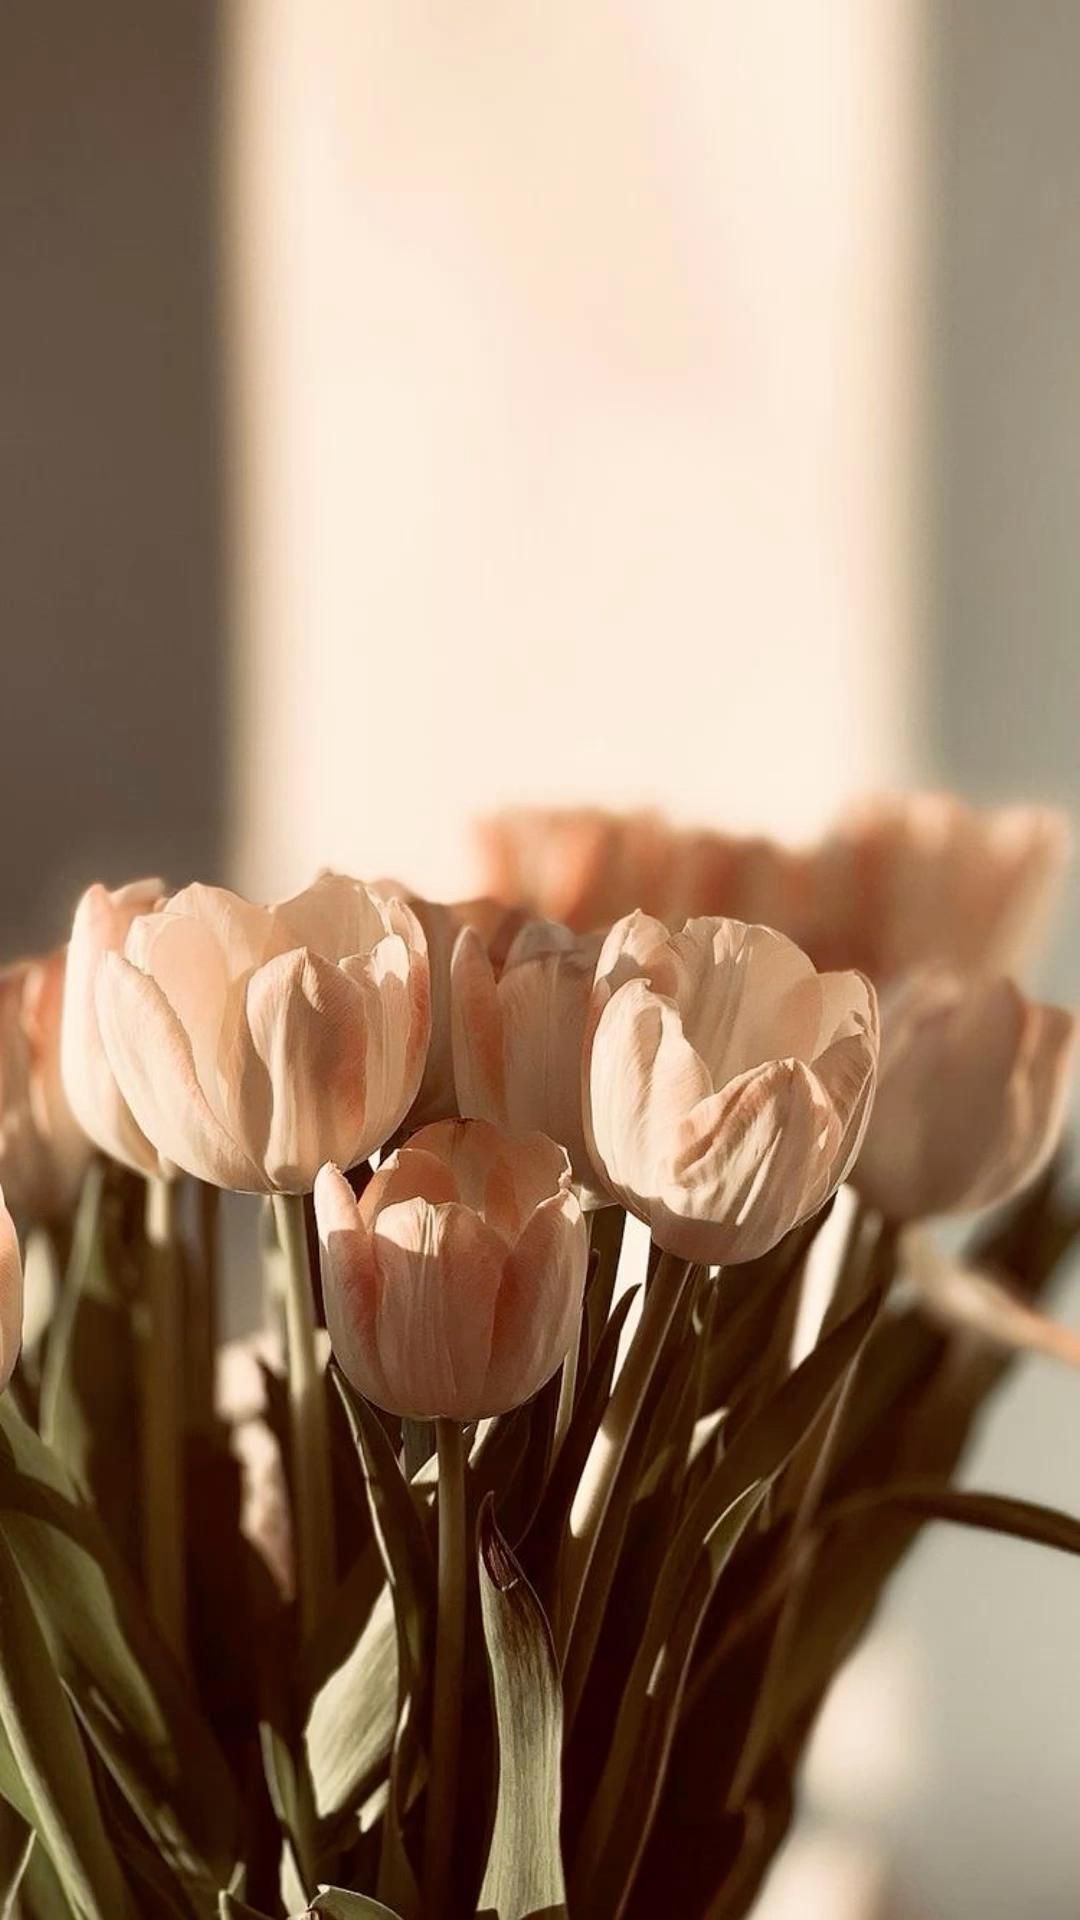 A bouquet of pink and peach tulips sit in a vase, with some of the flowers facing forward and others facing backward. The light shines through the flowers, creating a warm and soft atmosphere. - Tulip